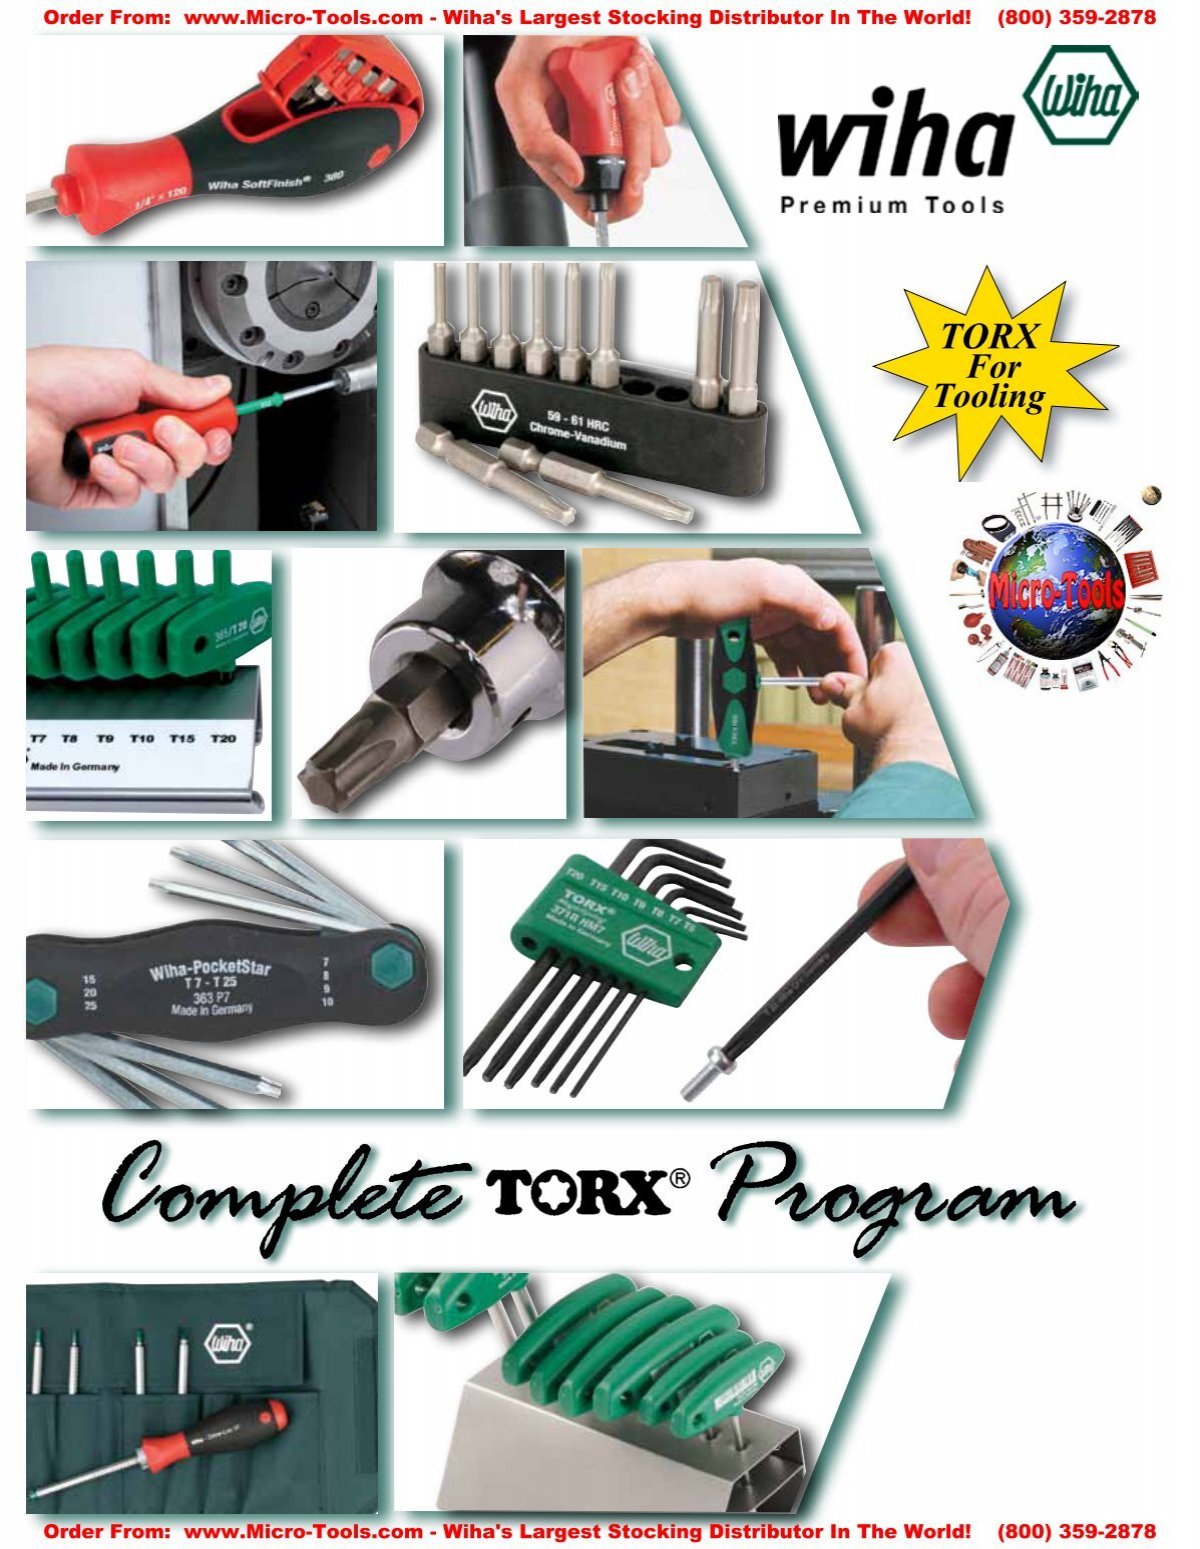 Torx Products Catalog 40 Pages Full Color ,1000 - Micro-Tools